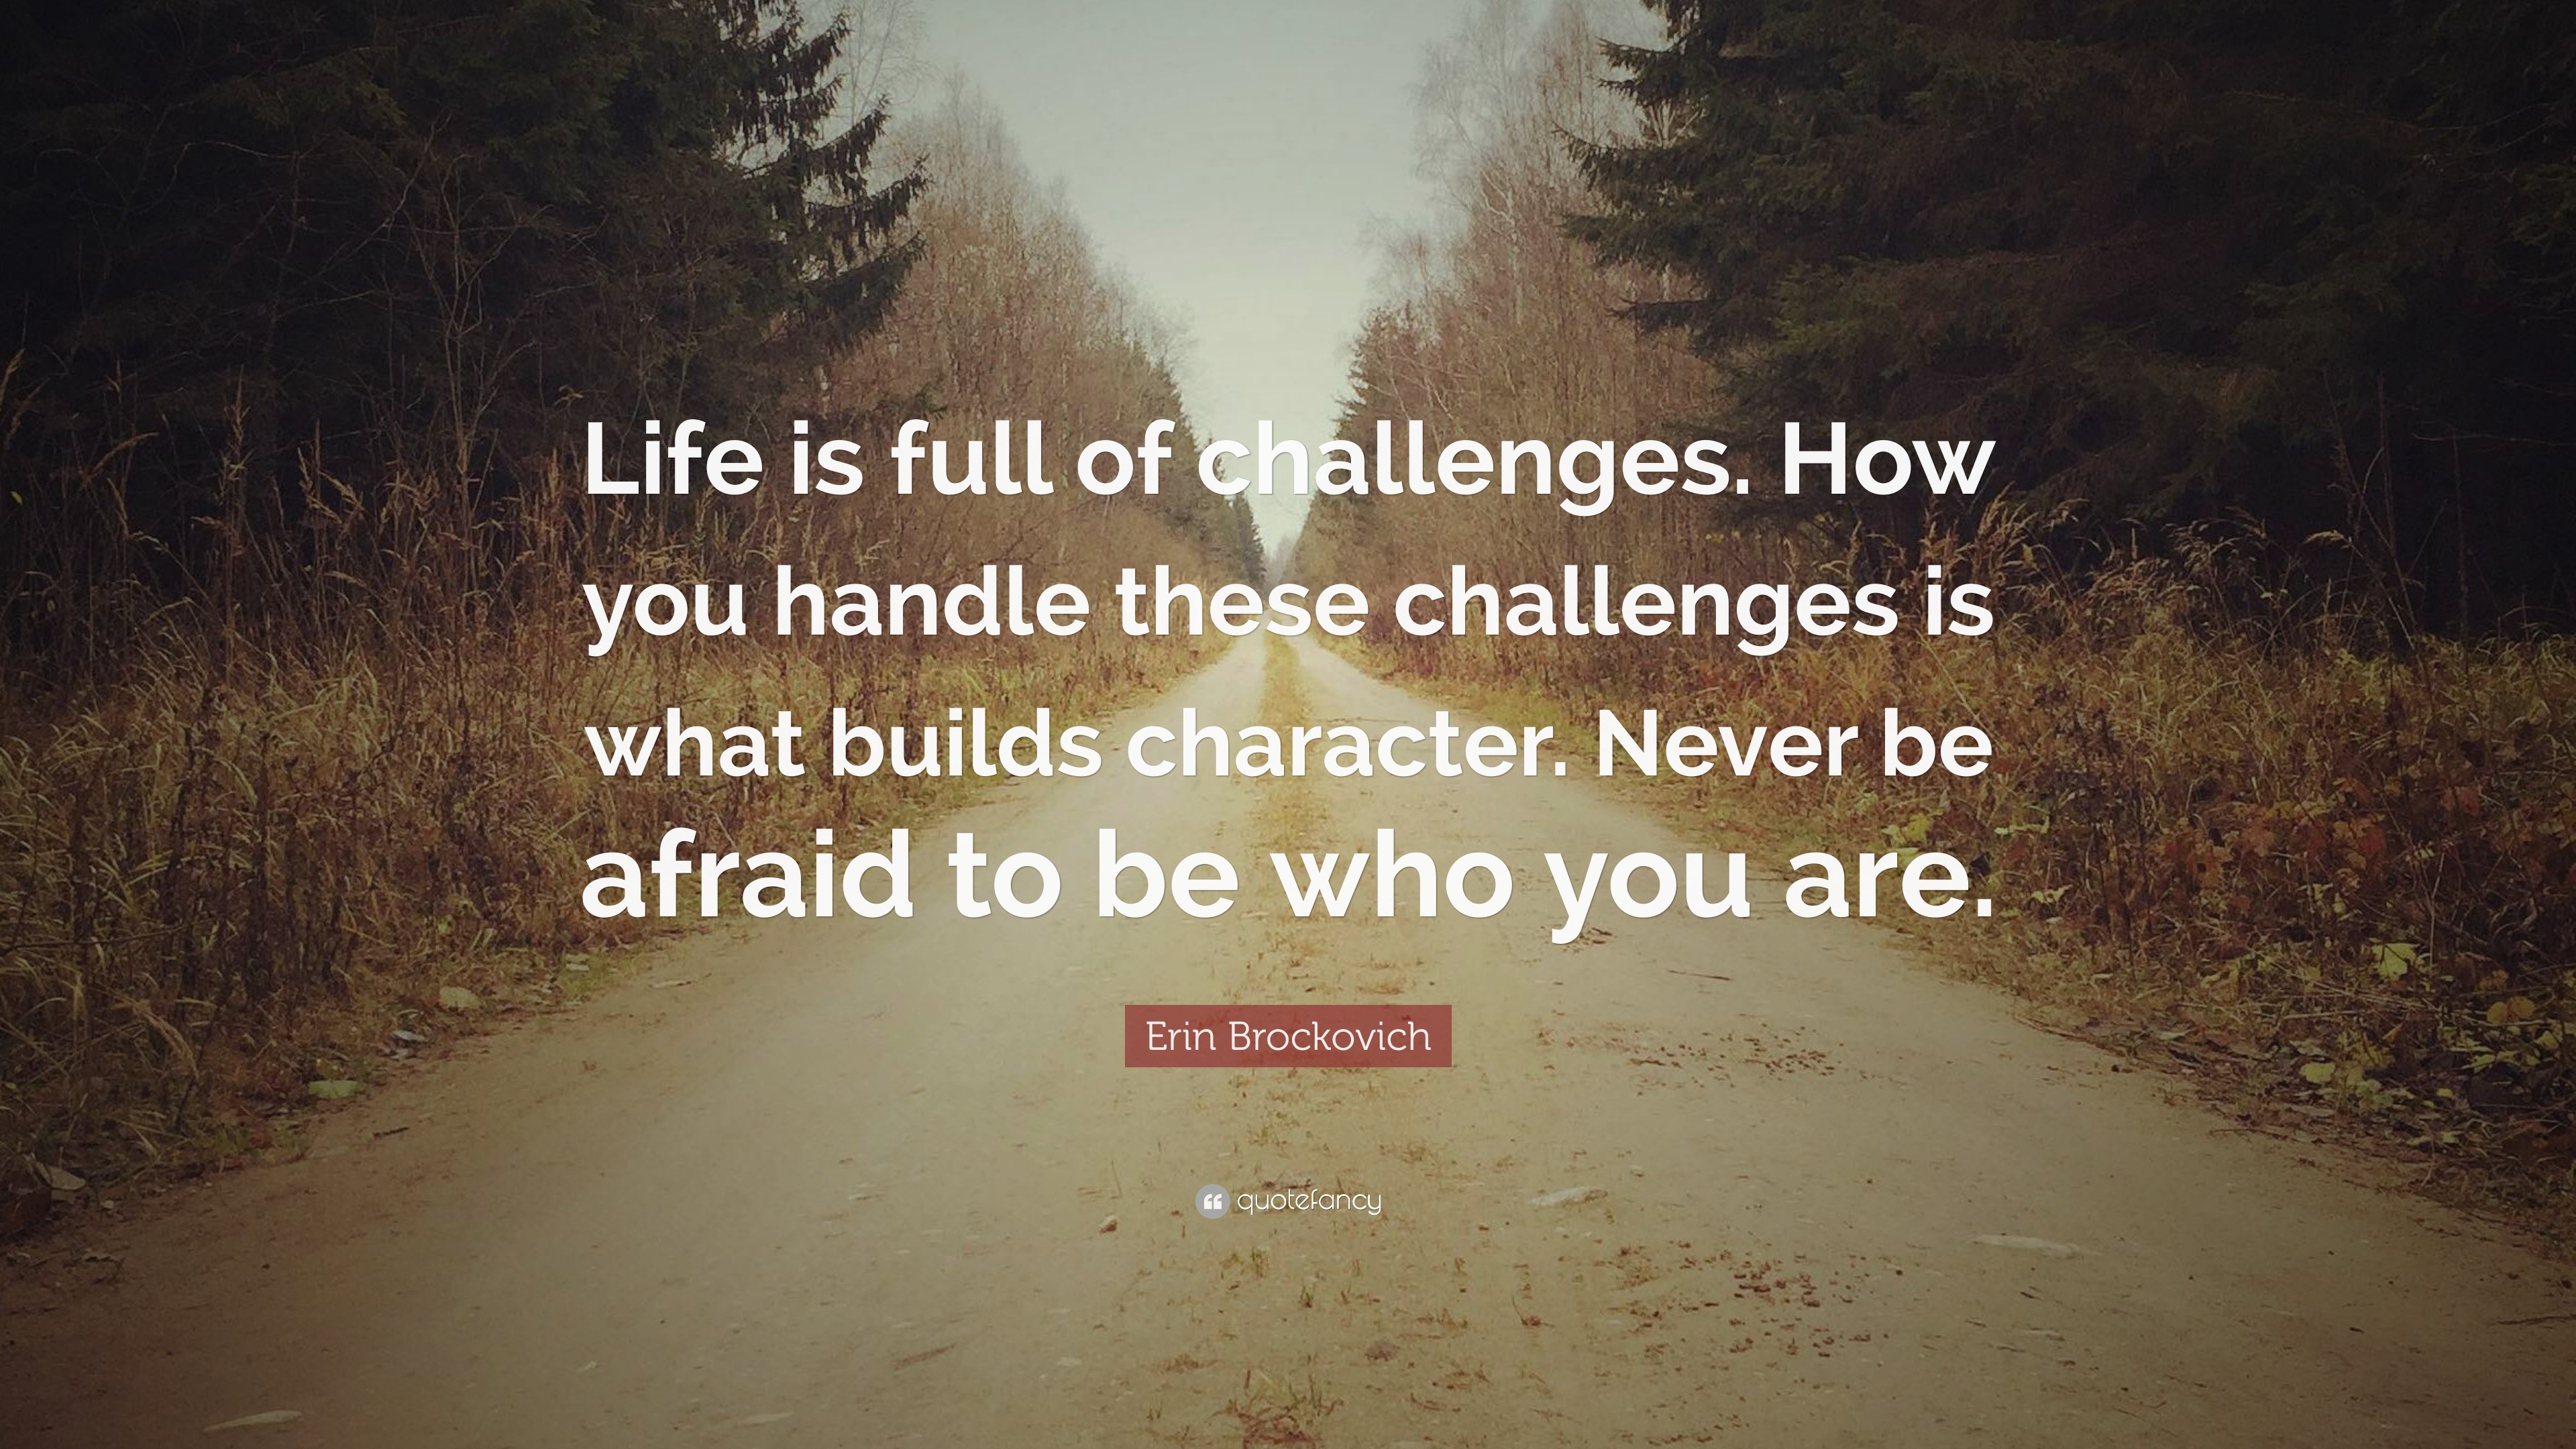 Quotes About Life Full Of Challenges - quotes about life